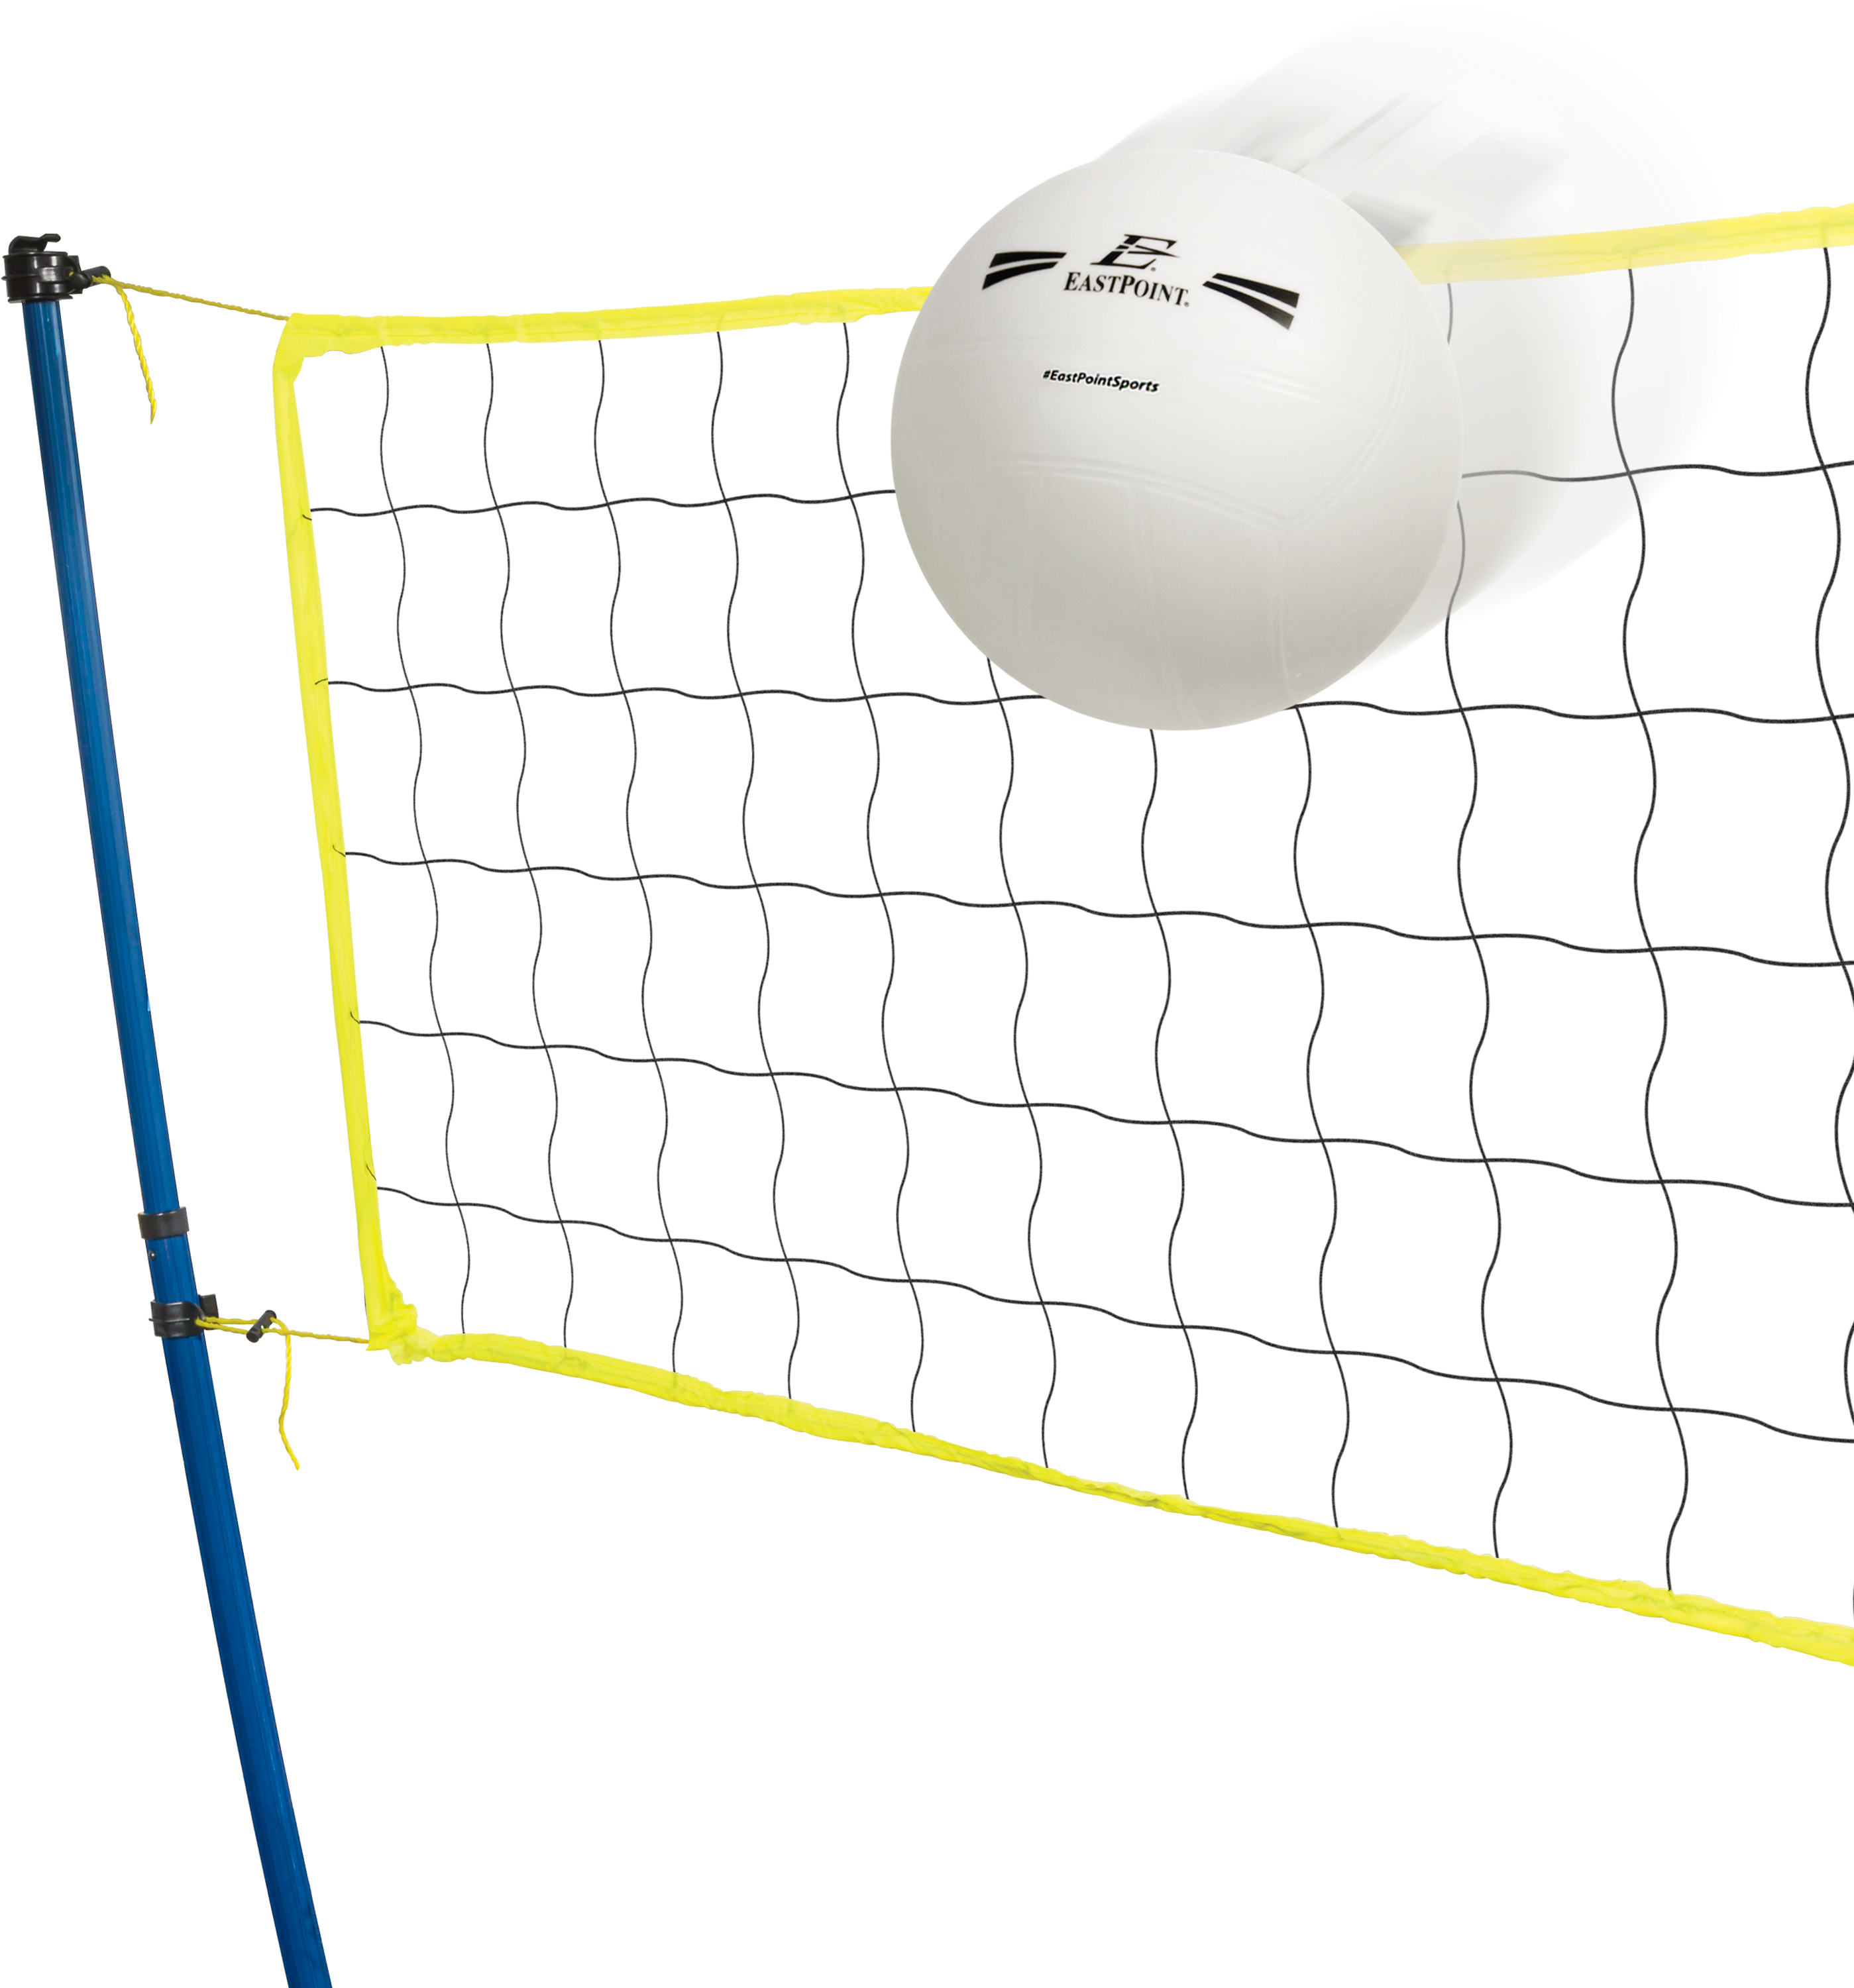 A Volleyball Net With A Ball In The Air